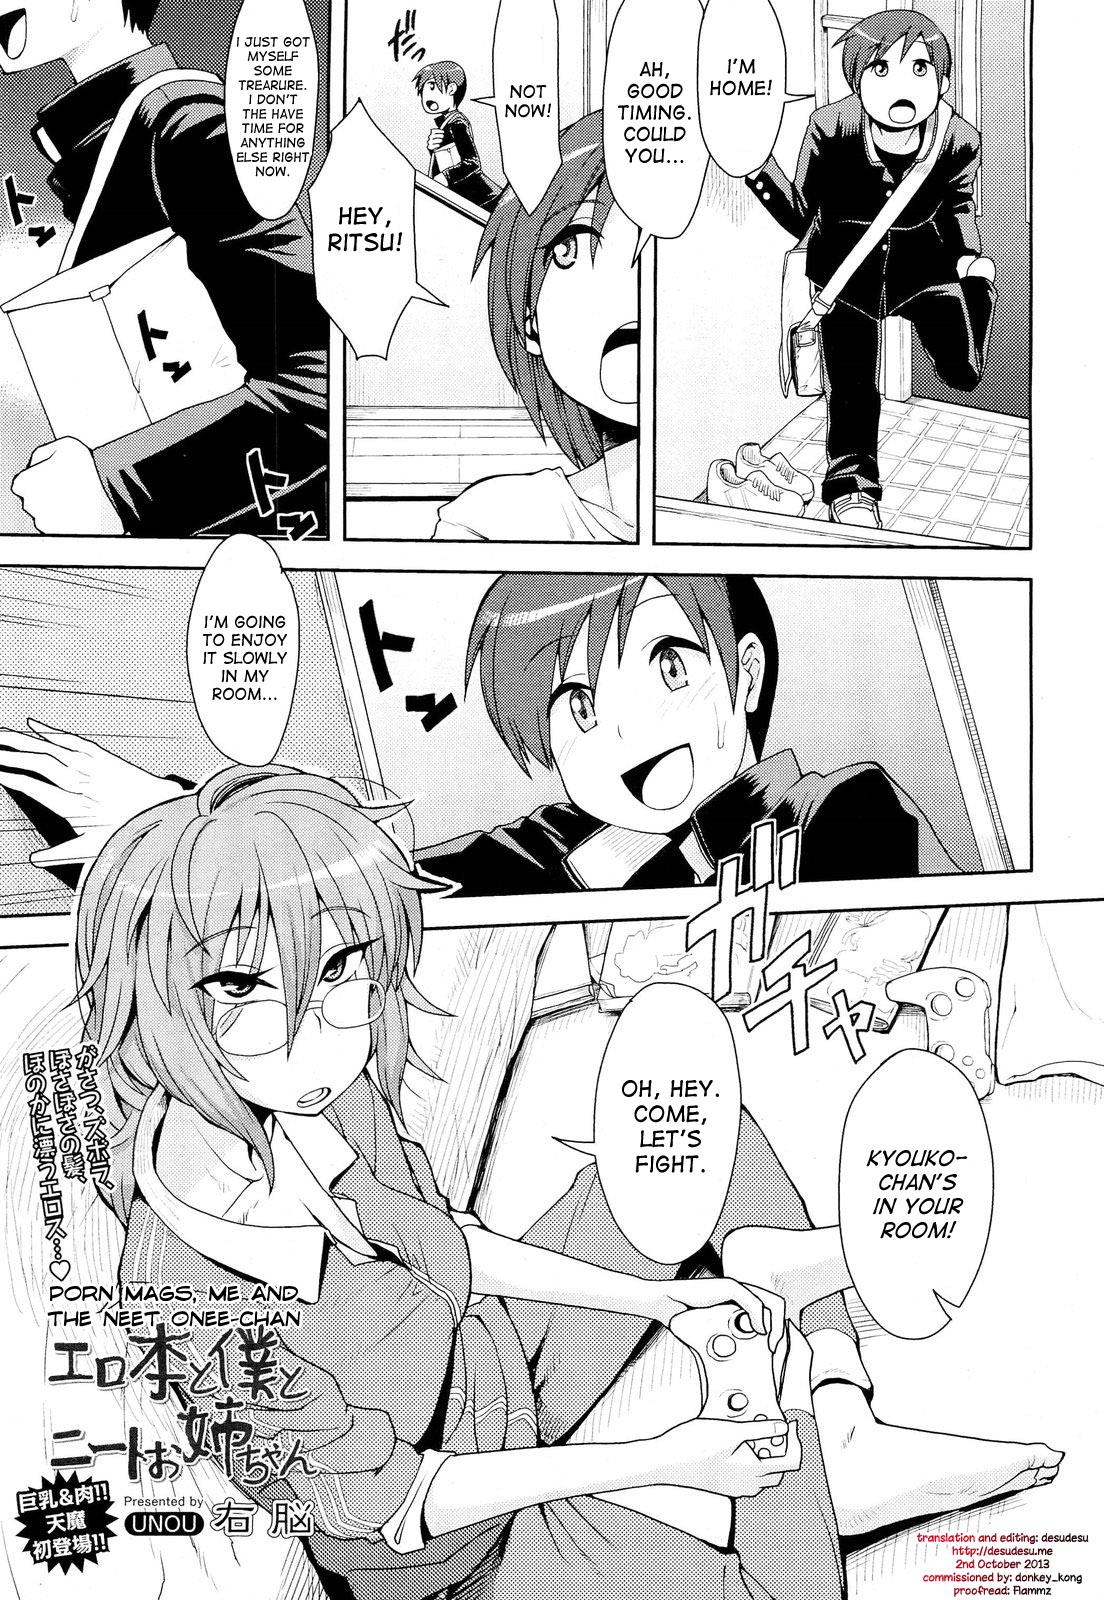 Three Some [UNOU] Erohon to Boku to NEET Onee-chan | Porn Mags, Me and The NEET Onee-chan (COMIC Tenma 2012-08) [English] [desudesu] Pussysex - Picture 1